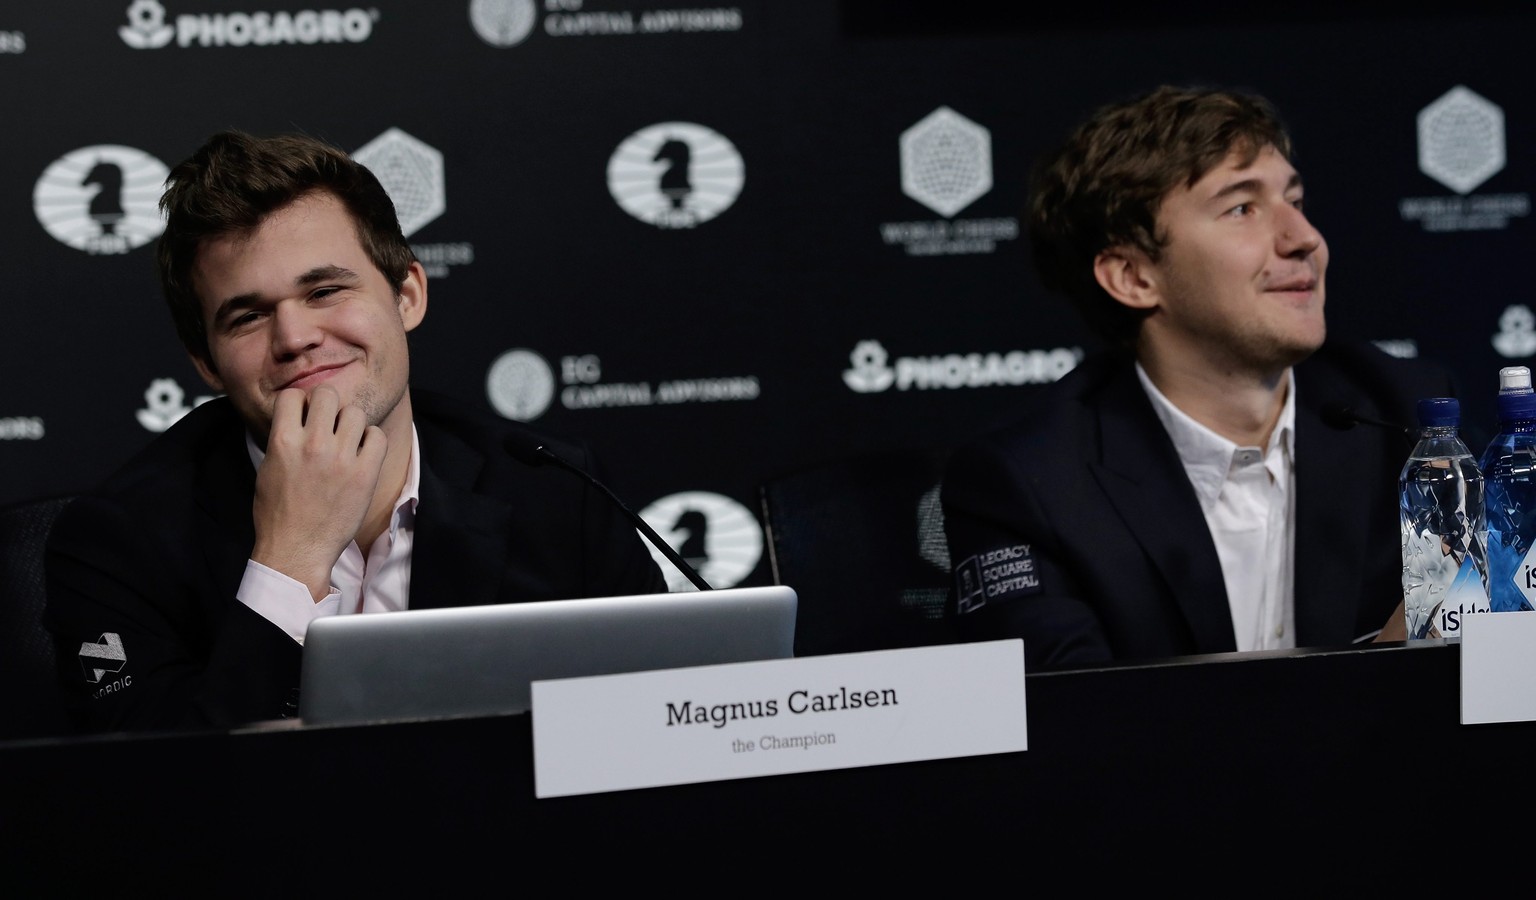 epa05651379 Chess players Magnus Carlsen (L) of Norway, the reigning world chess champion, and Sergey Karjakin, of Russia, attend a press conference after round 12 ended in a draw of the World Chess C ...